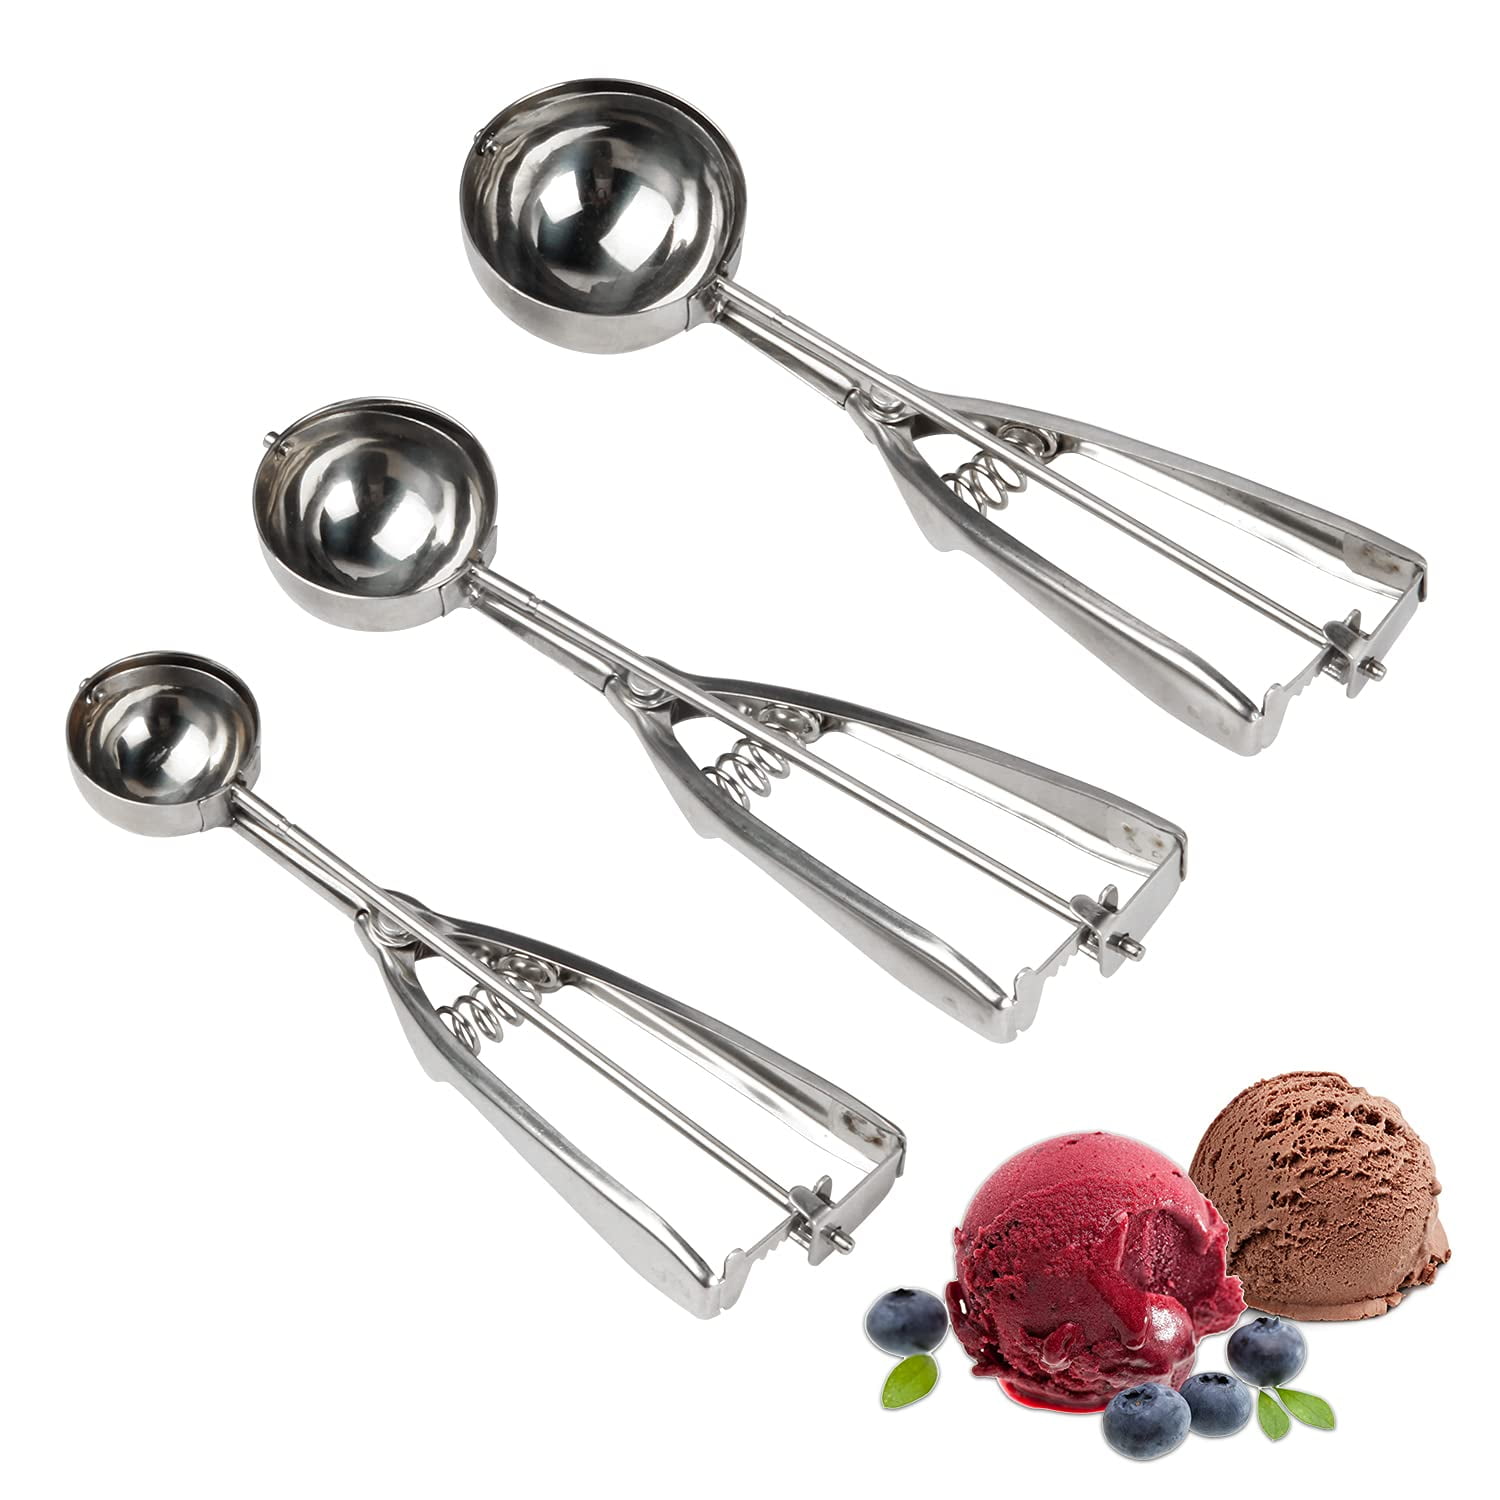 Solula-Stainless-Large-Cookie-Scoop, Cupcake Muffin Batter Dispenser, Ice  Cream Cupcake Muffin Scoop, Food-grade 18/8 Stainless Steel, Size 24